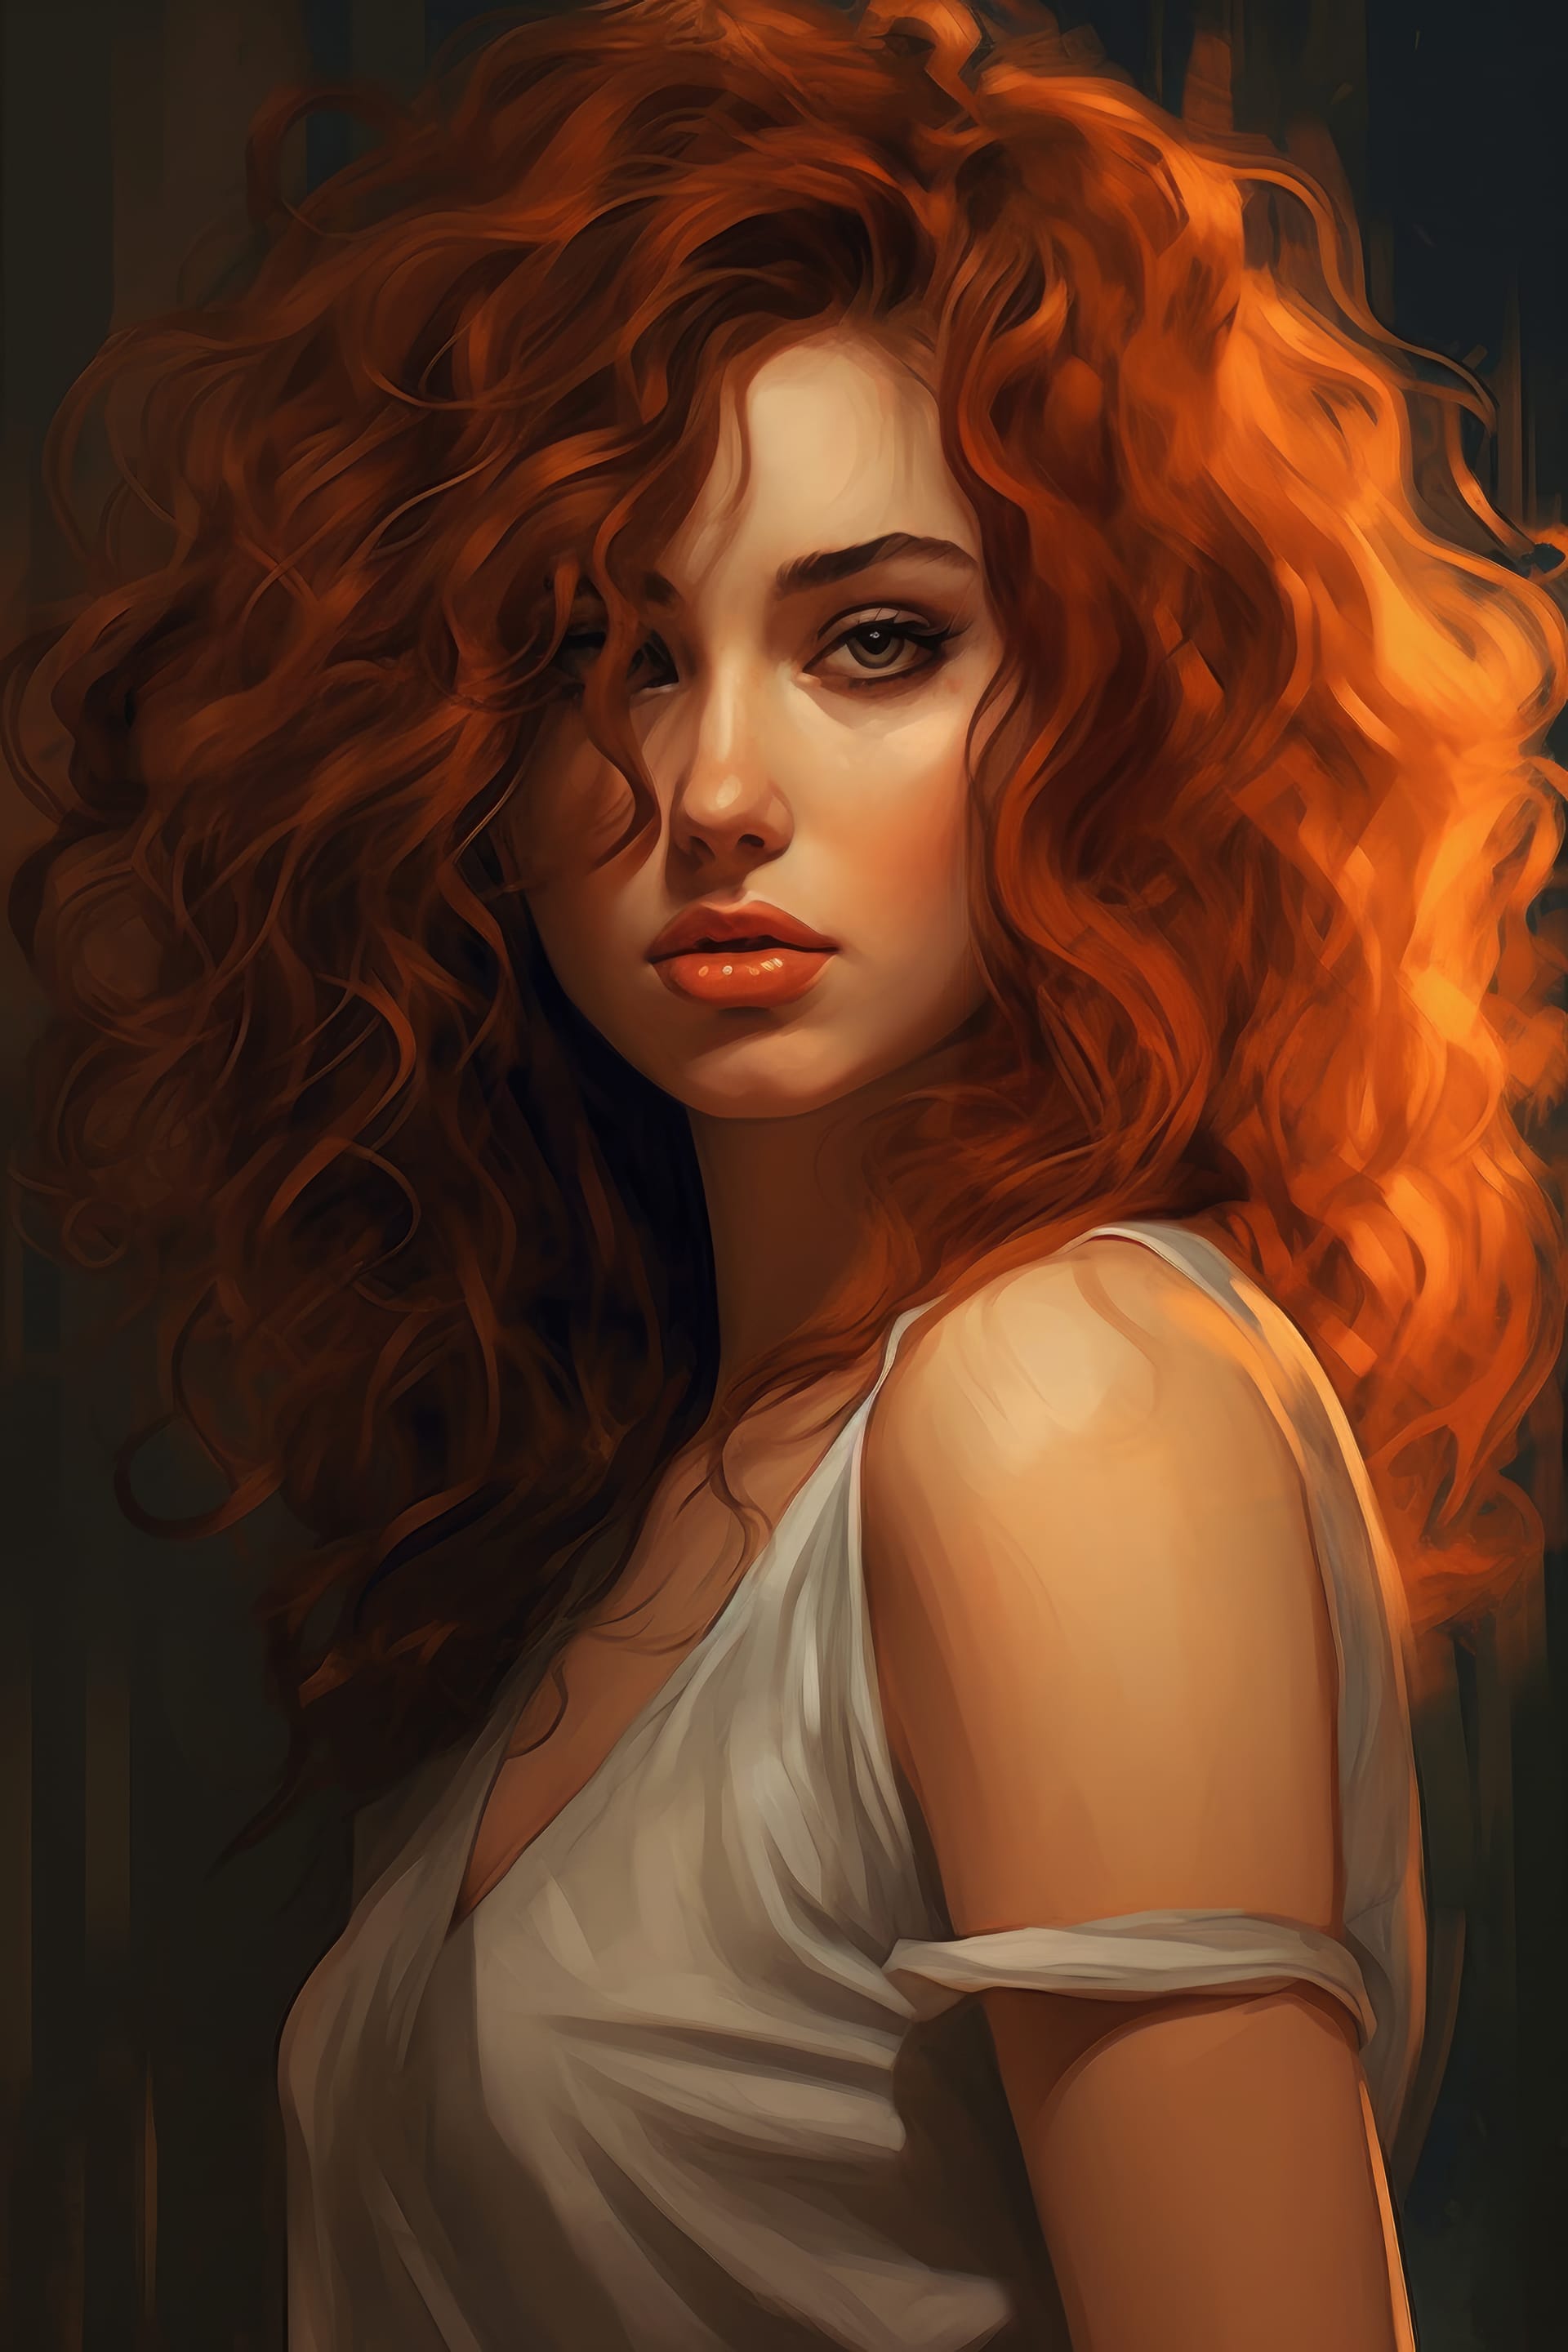 Realistic painting beautiful woman with curly hair